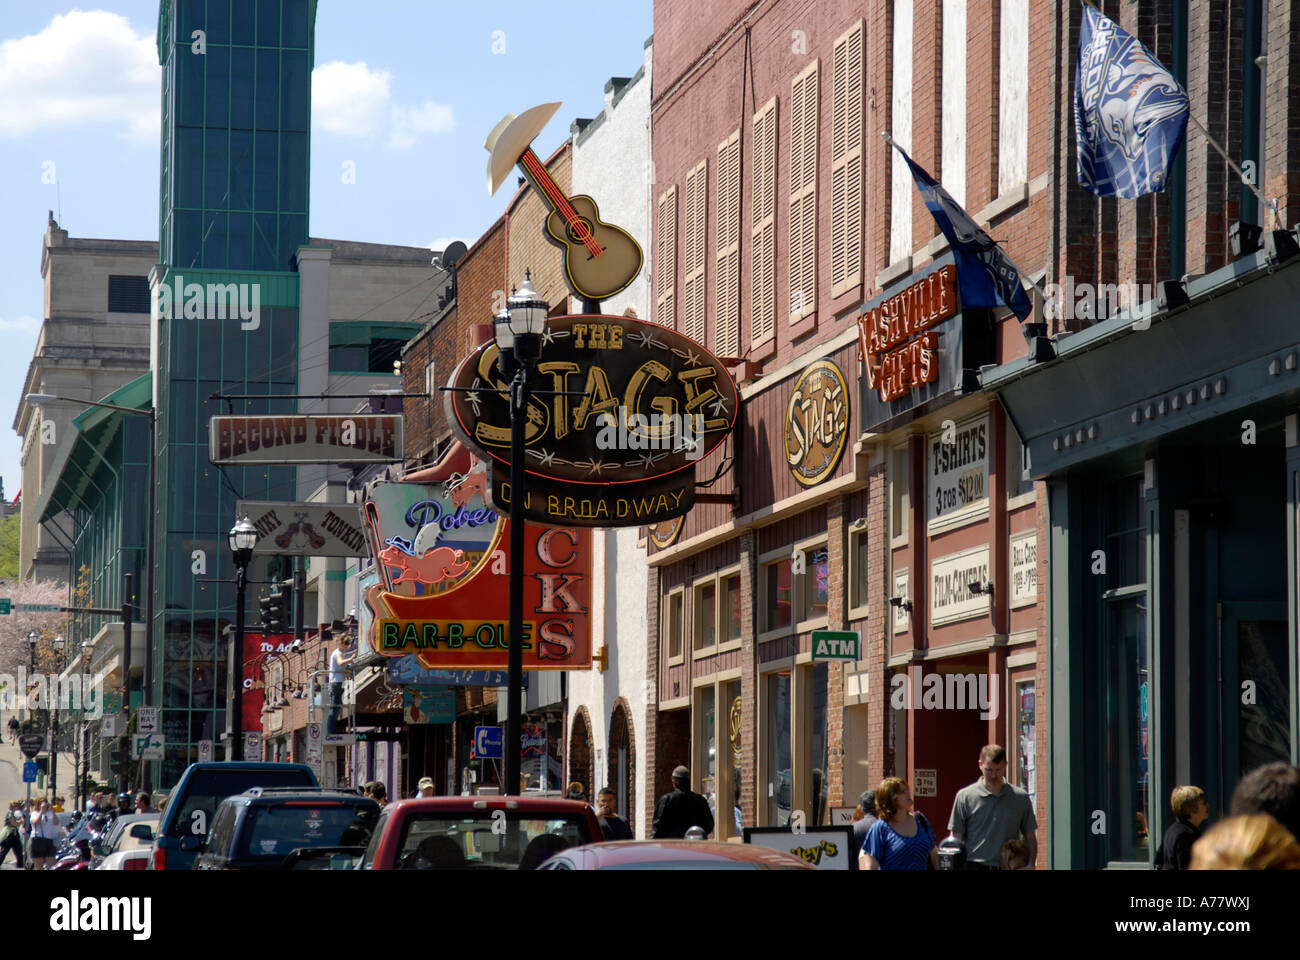 Live Music Venues Restaurants Shopping Along Broadway Street in